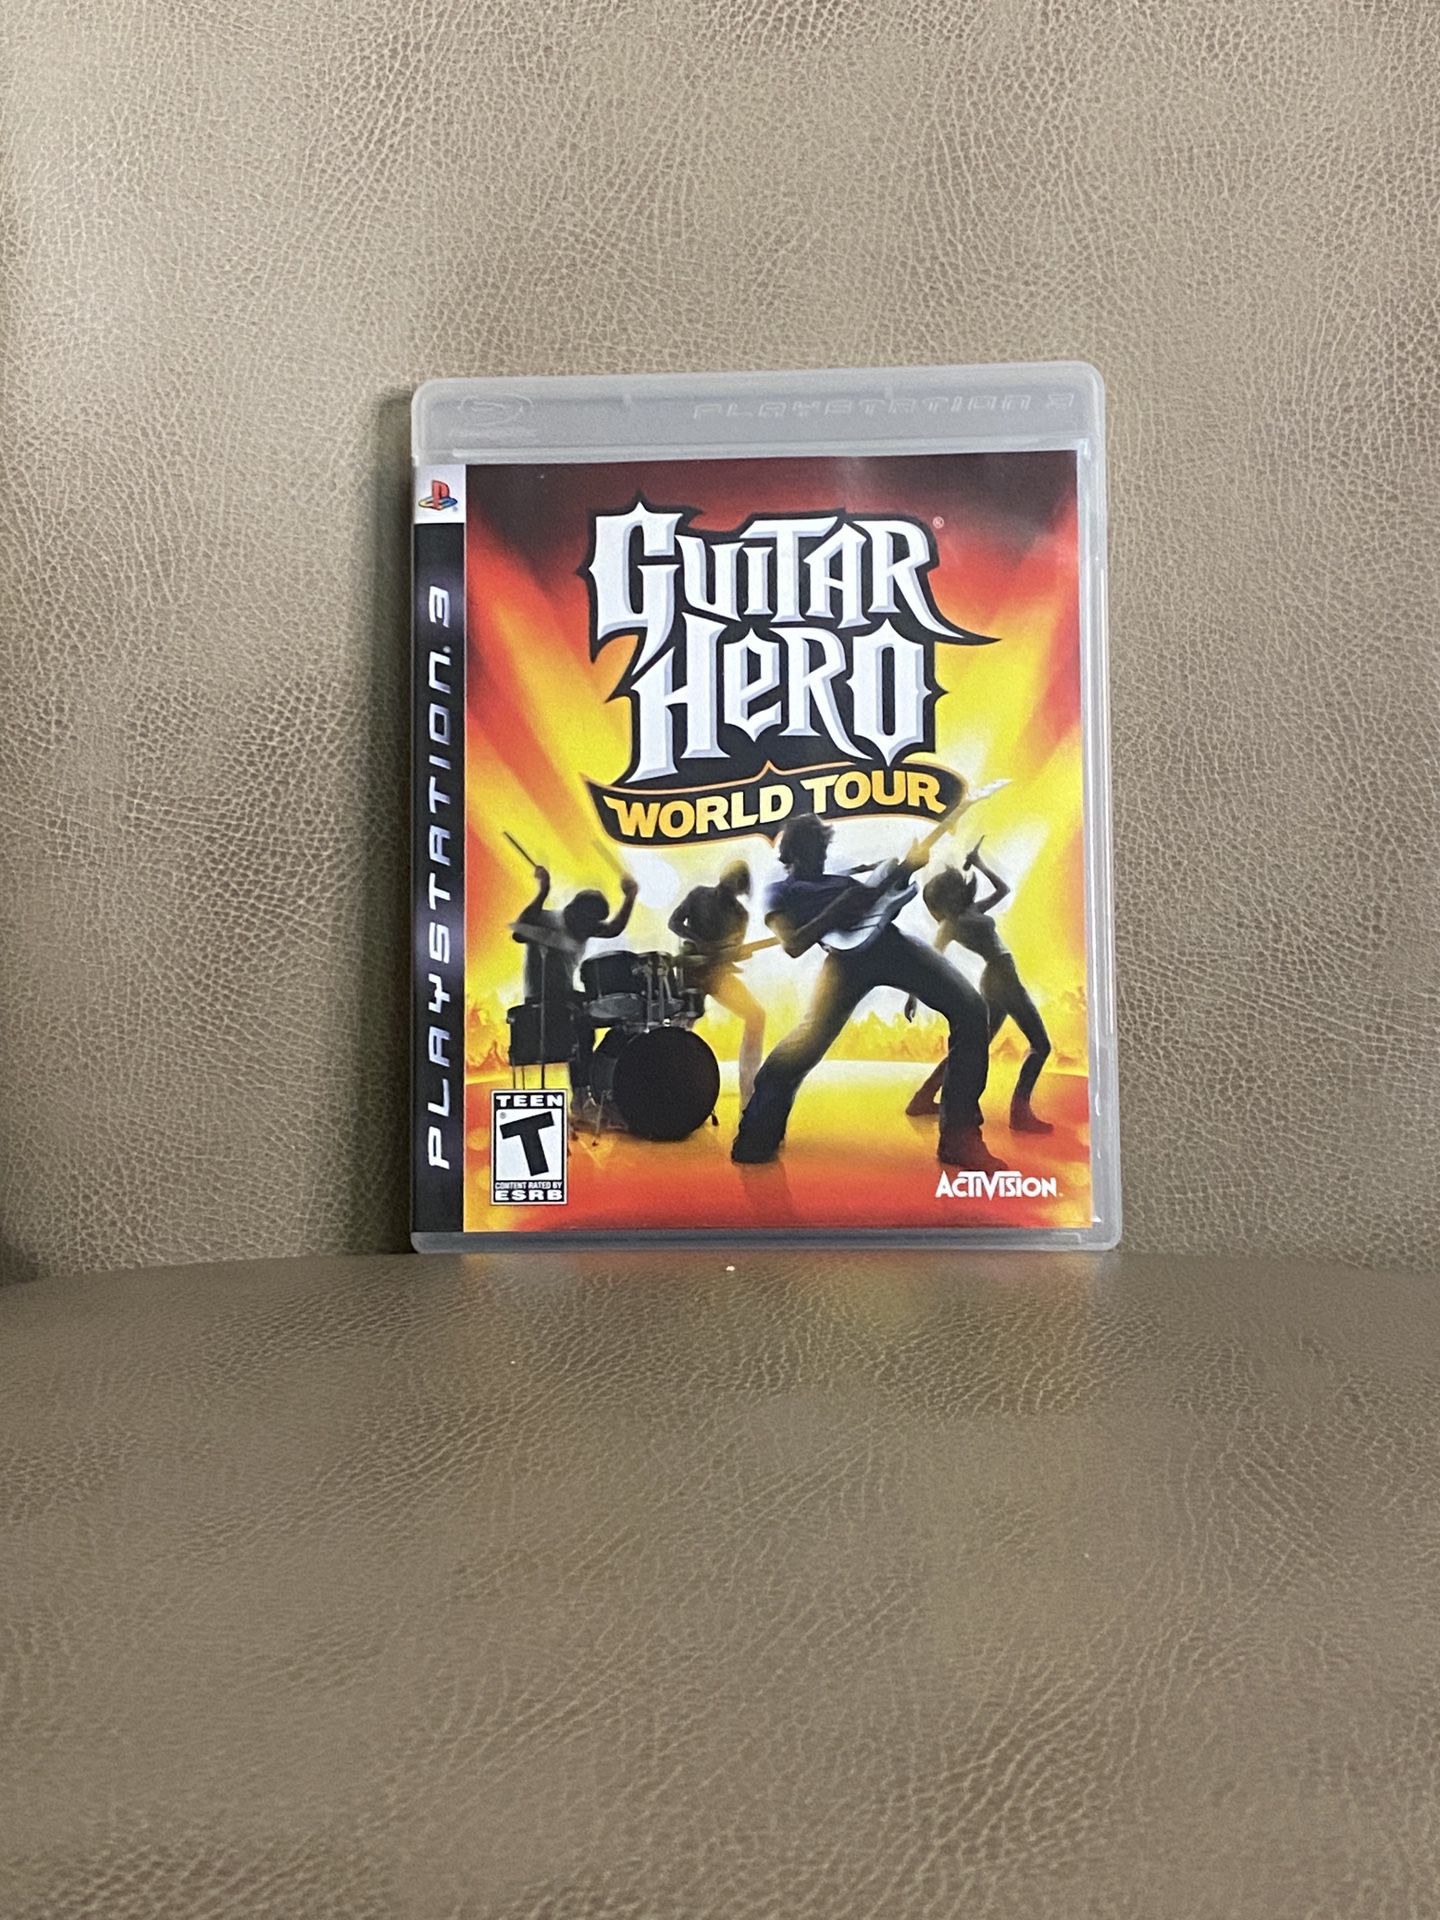 Guitar Hero World Tour - Playstation 3 - Used -CIB Complete In Box - Untested